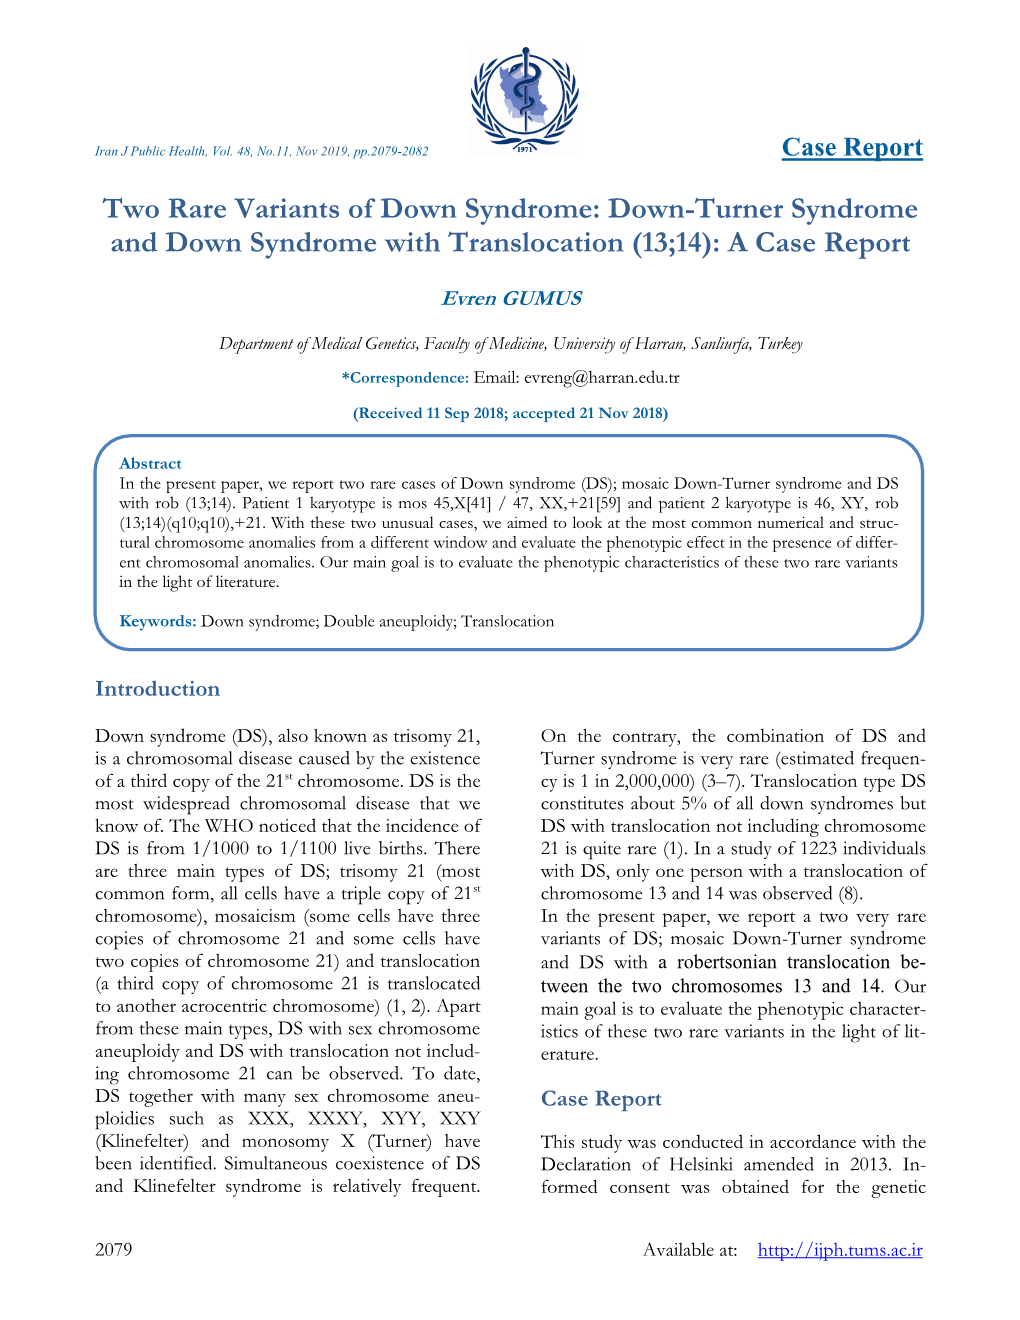 Two Rare Variants of Down Syndrome: Down-Turner Syndrome and Down Syndrome with Translocation (13;14): a Case Report